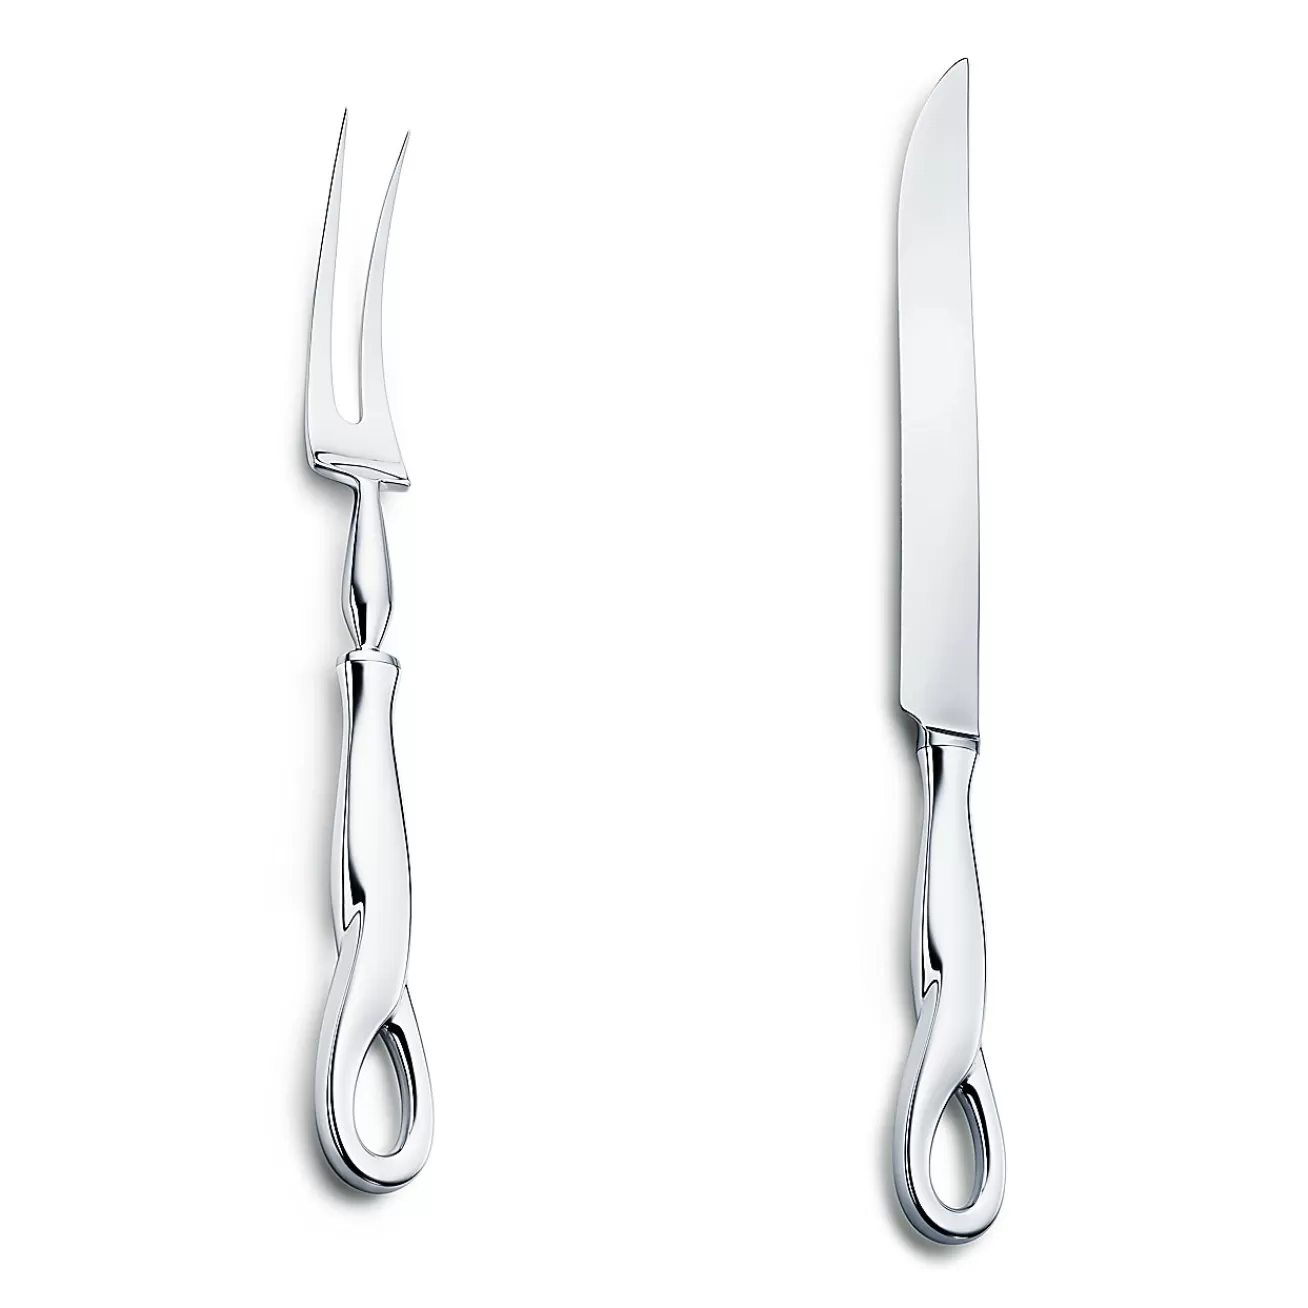 Tiffany & Co. Elsa Peretti® Padova™ carving knife and fork set in sterling silver. | ^ Tableware | Flatware & Trays